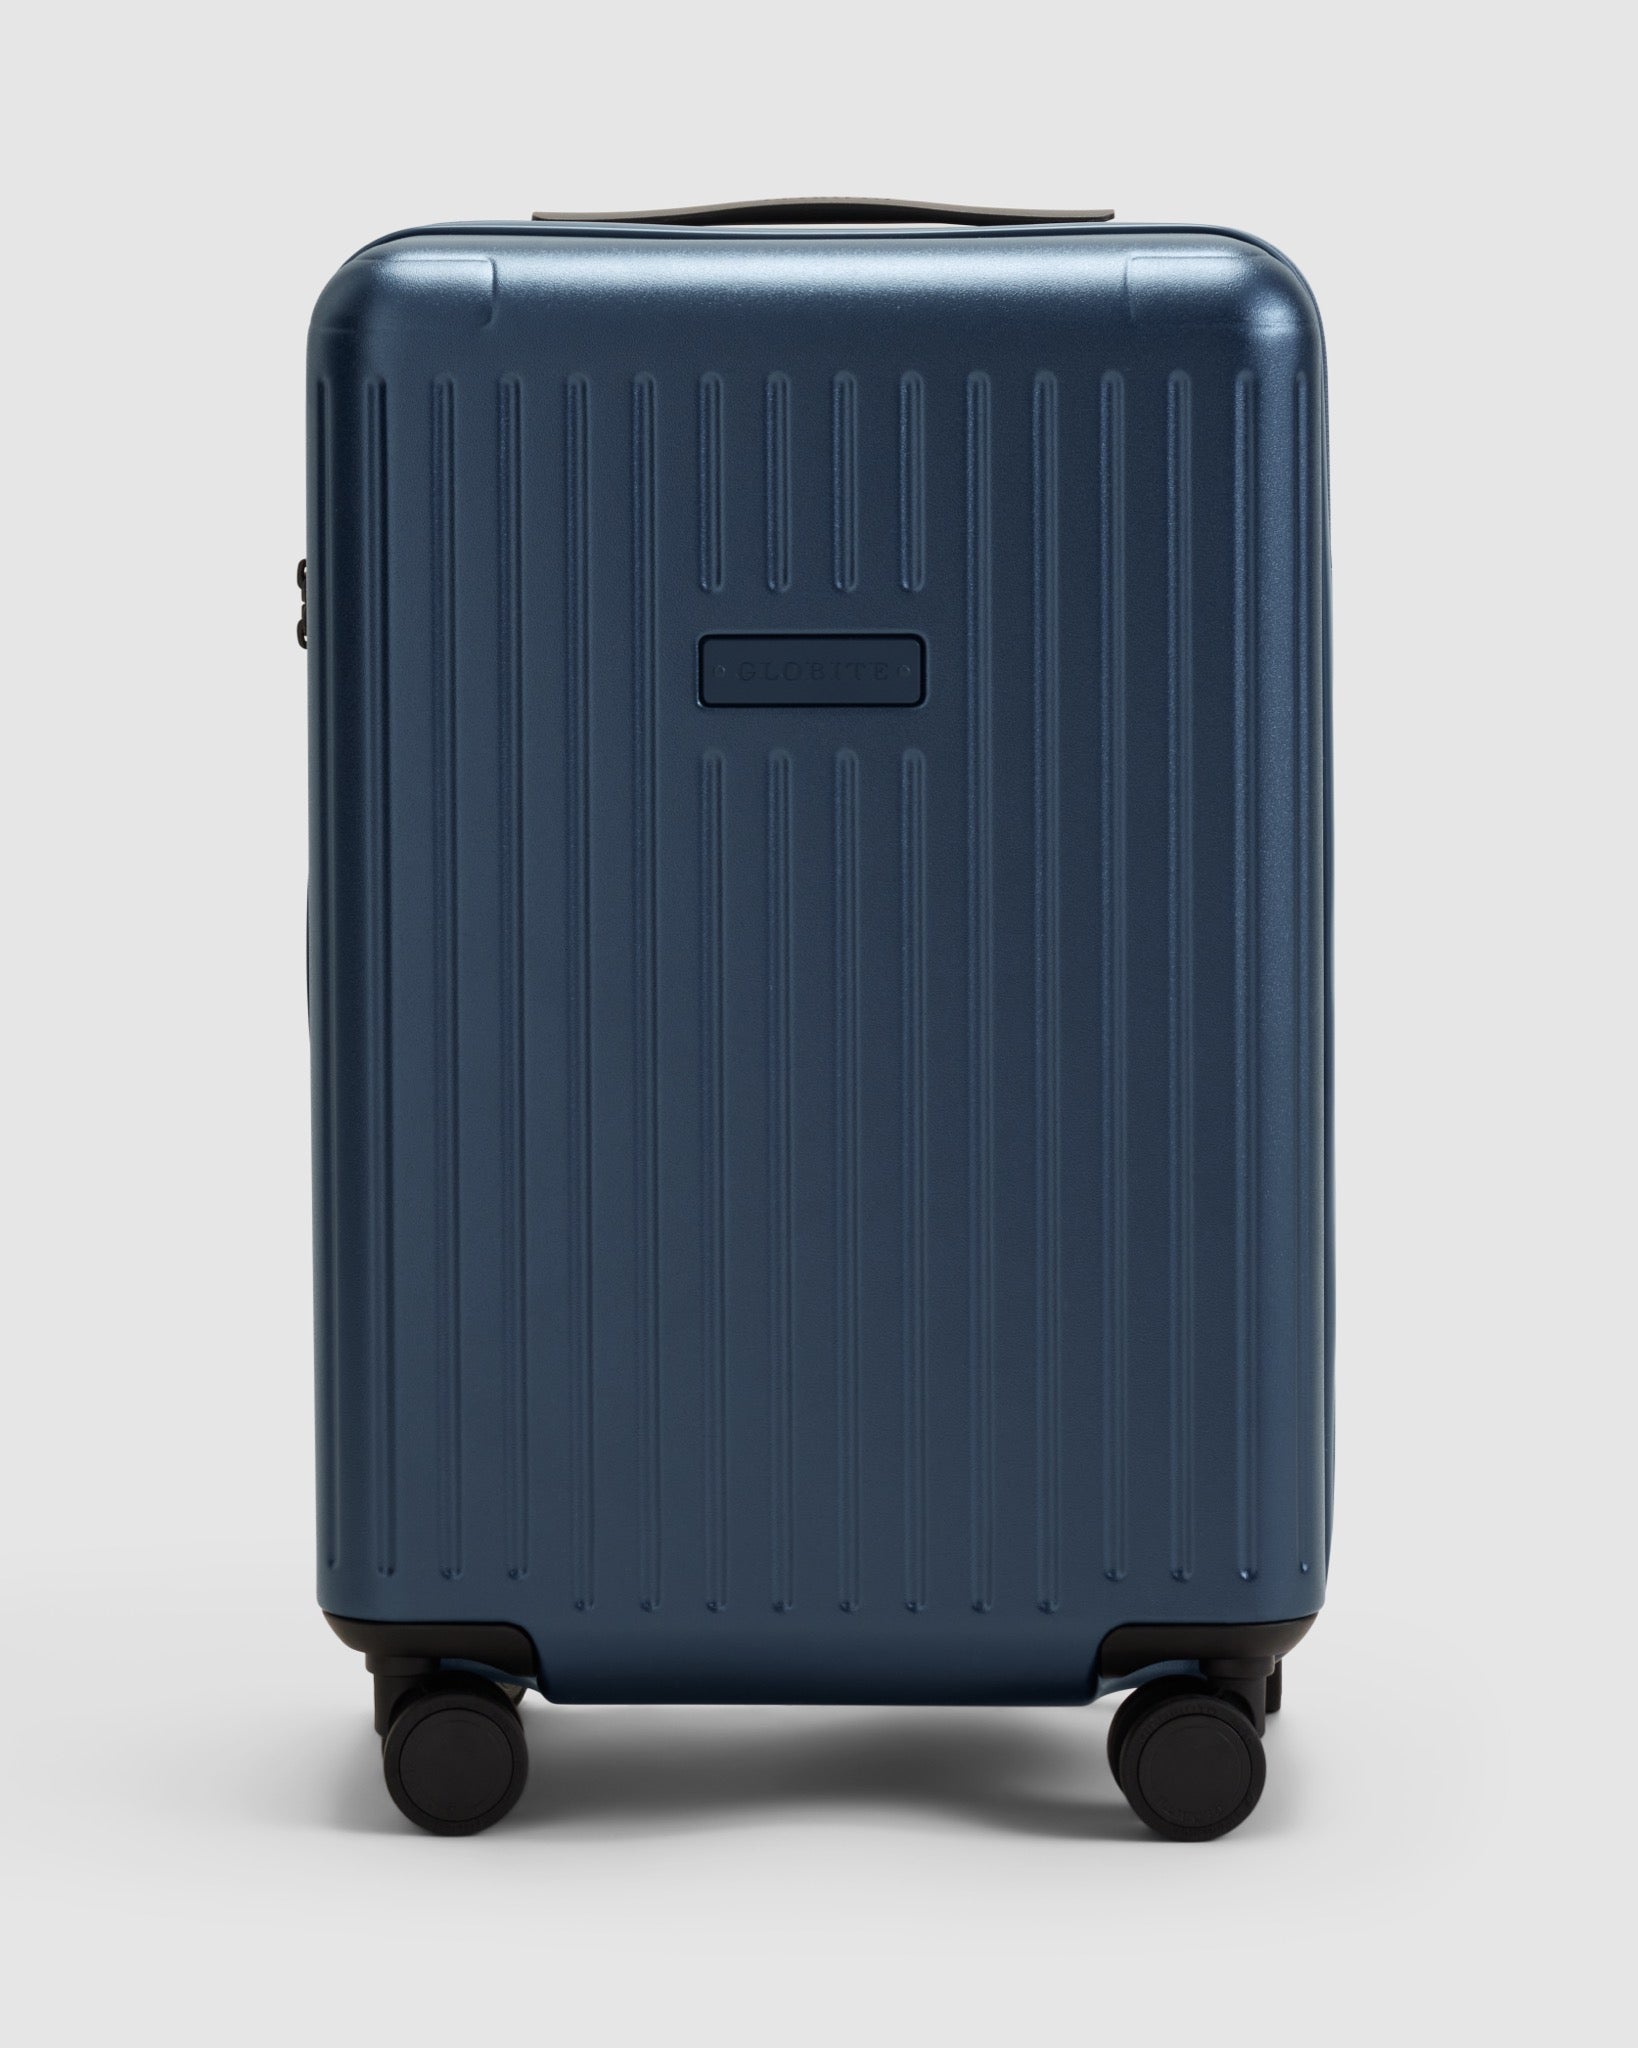 Journey Carry On Luggage - Moonlit Ocean